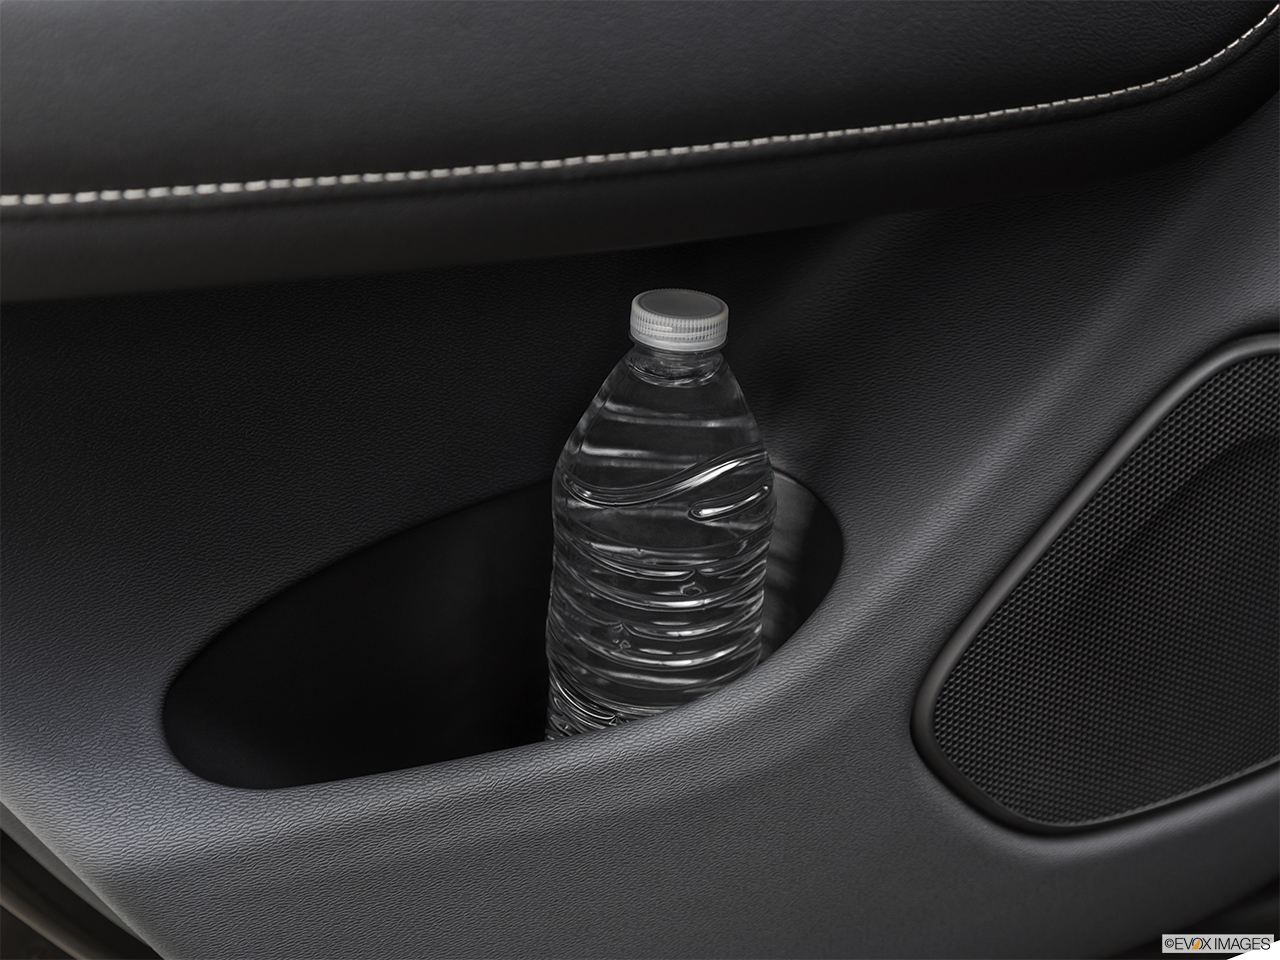 2019 Volvo XC60 T8 R-Design eAWD Plug-in Hybrid Second row side cup holder with coffee prop, or second row door cup holder with water bottle. 